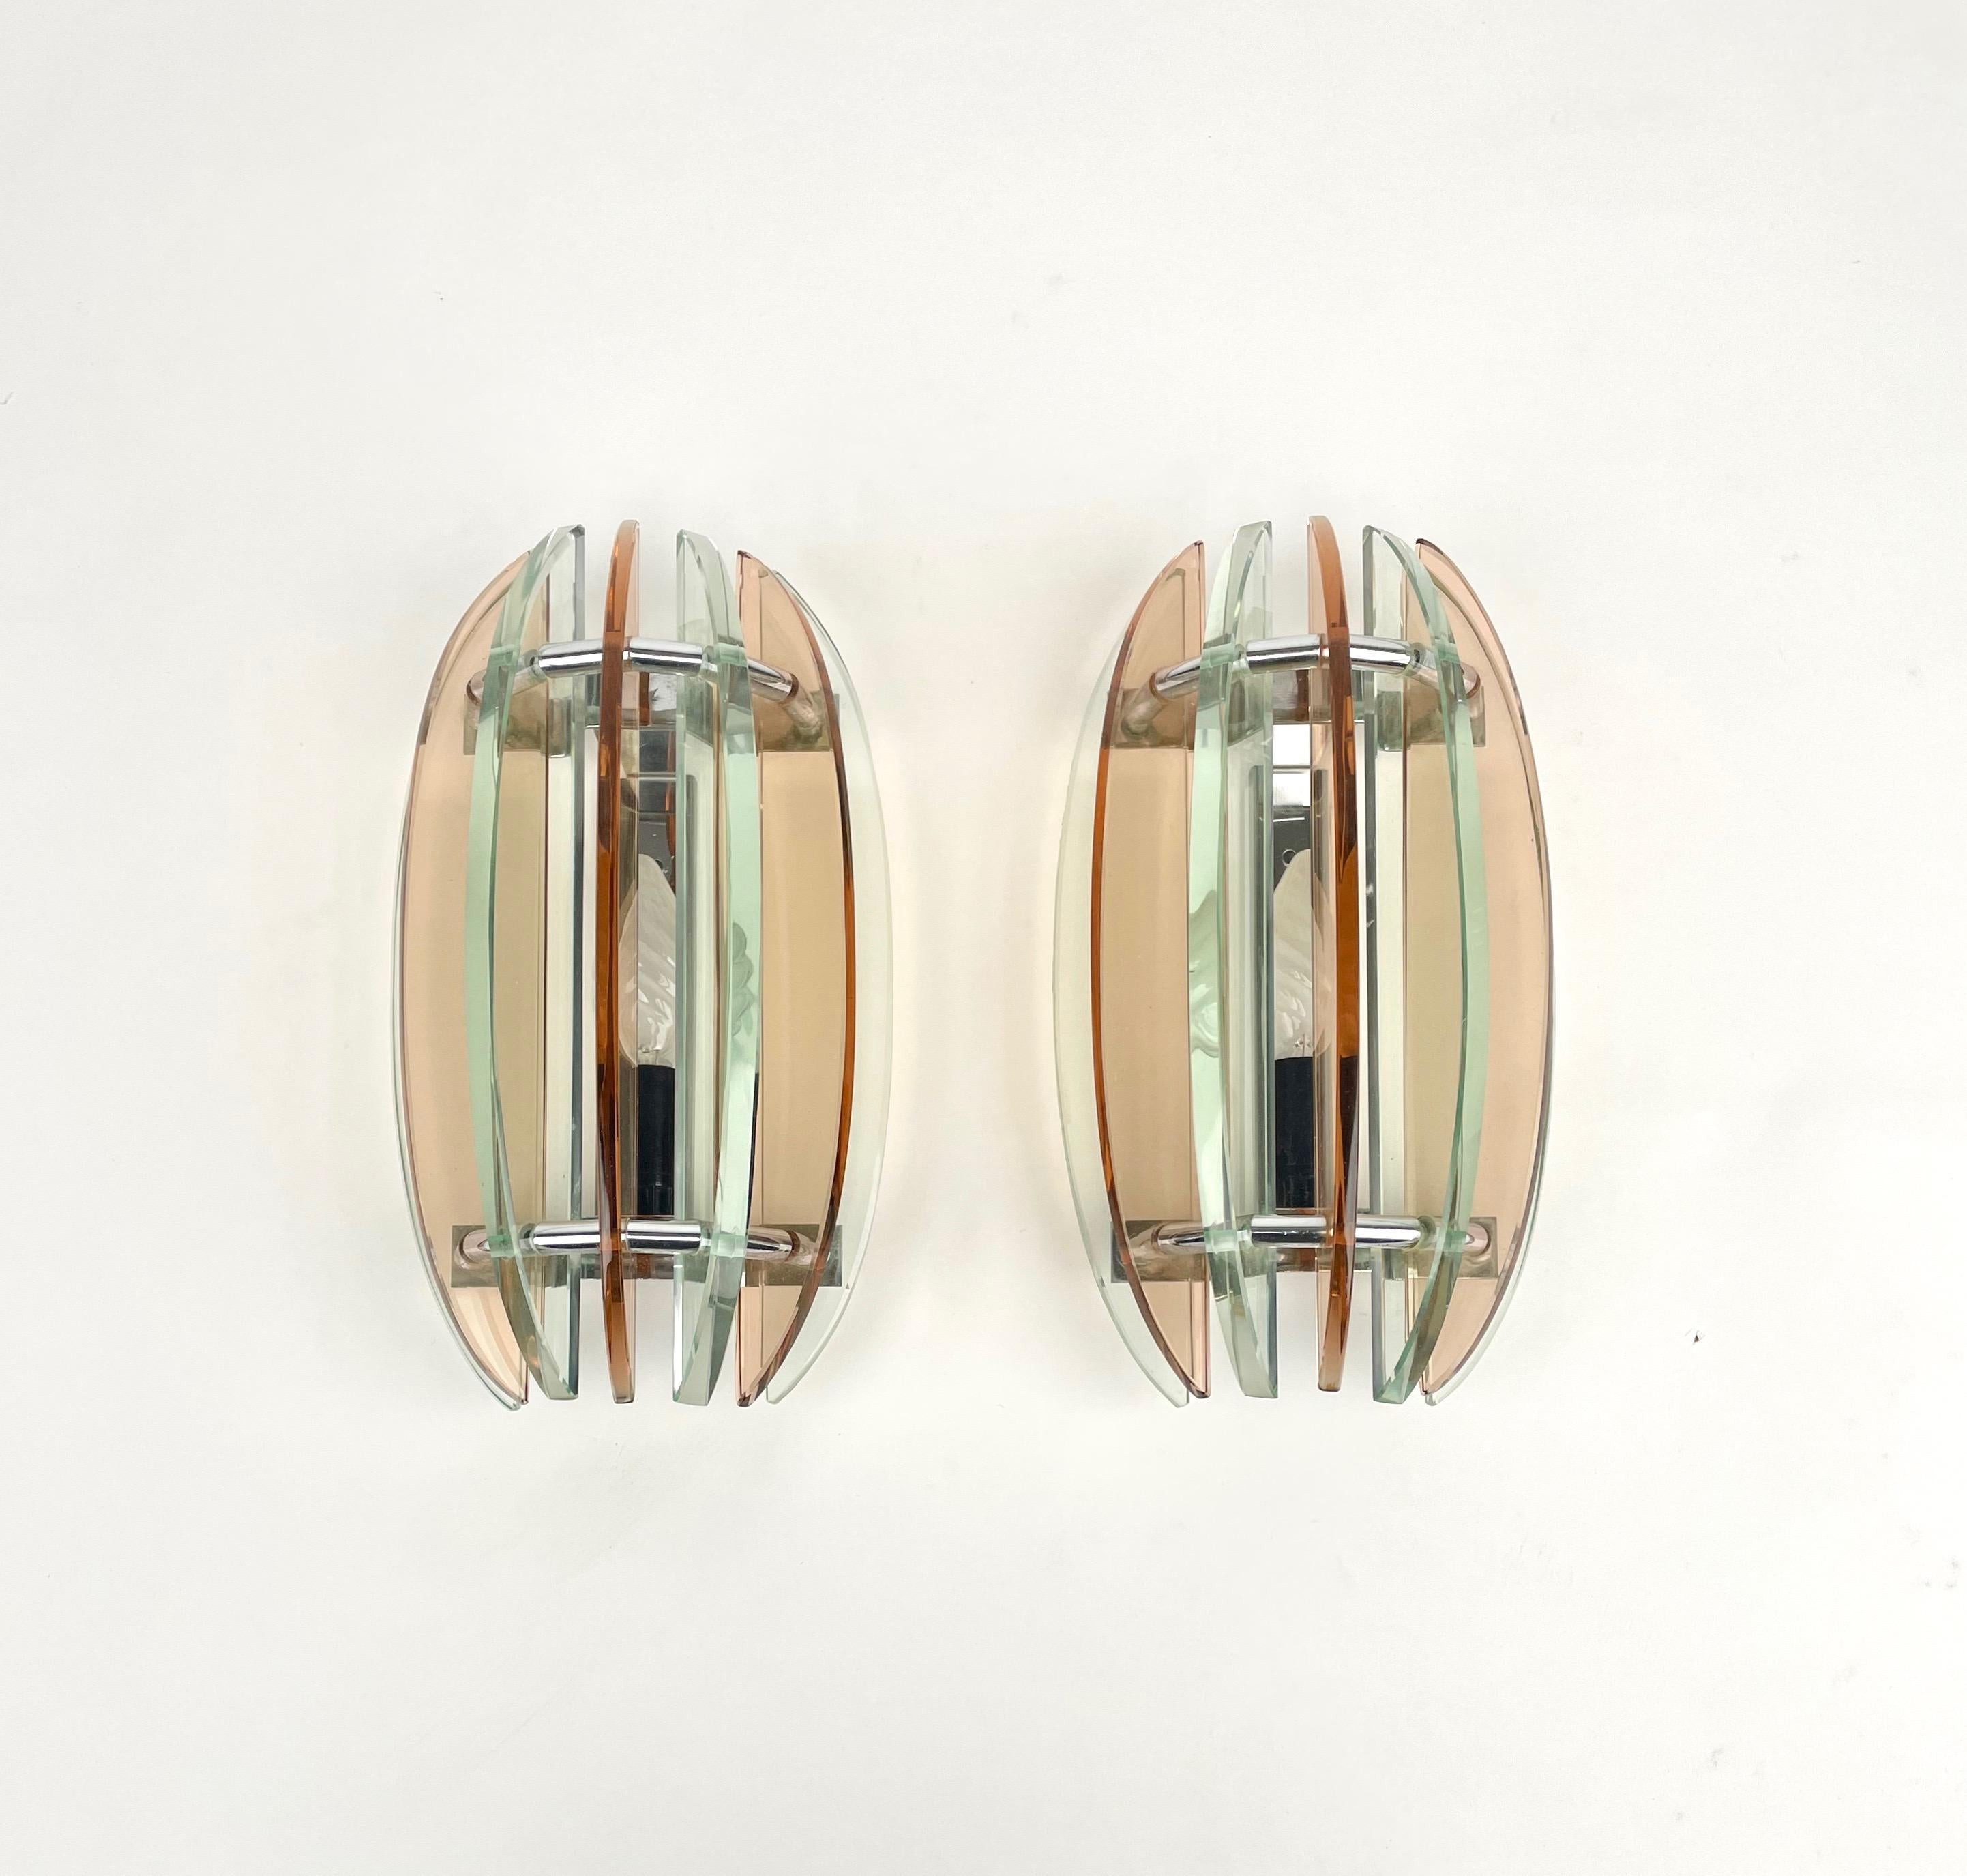 Pair of wall sconces in colored glass (pink and green) and chrome by Veca, Italy, 1970s.

The original label is still attached.